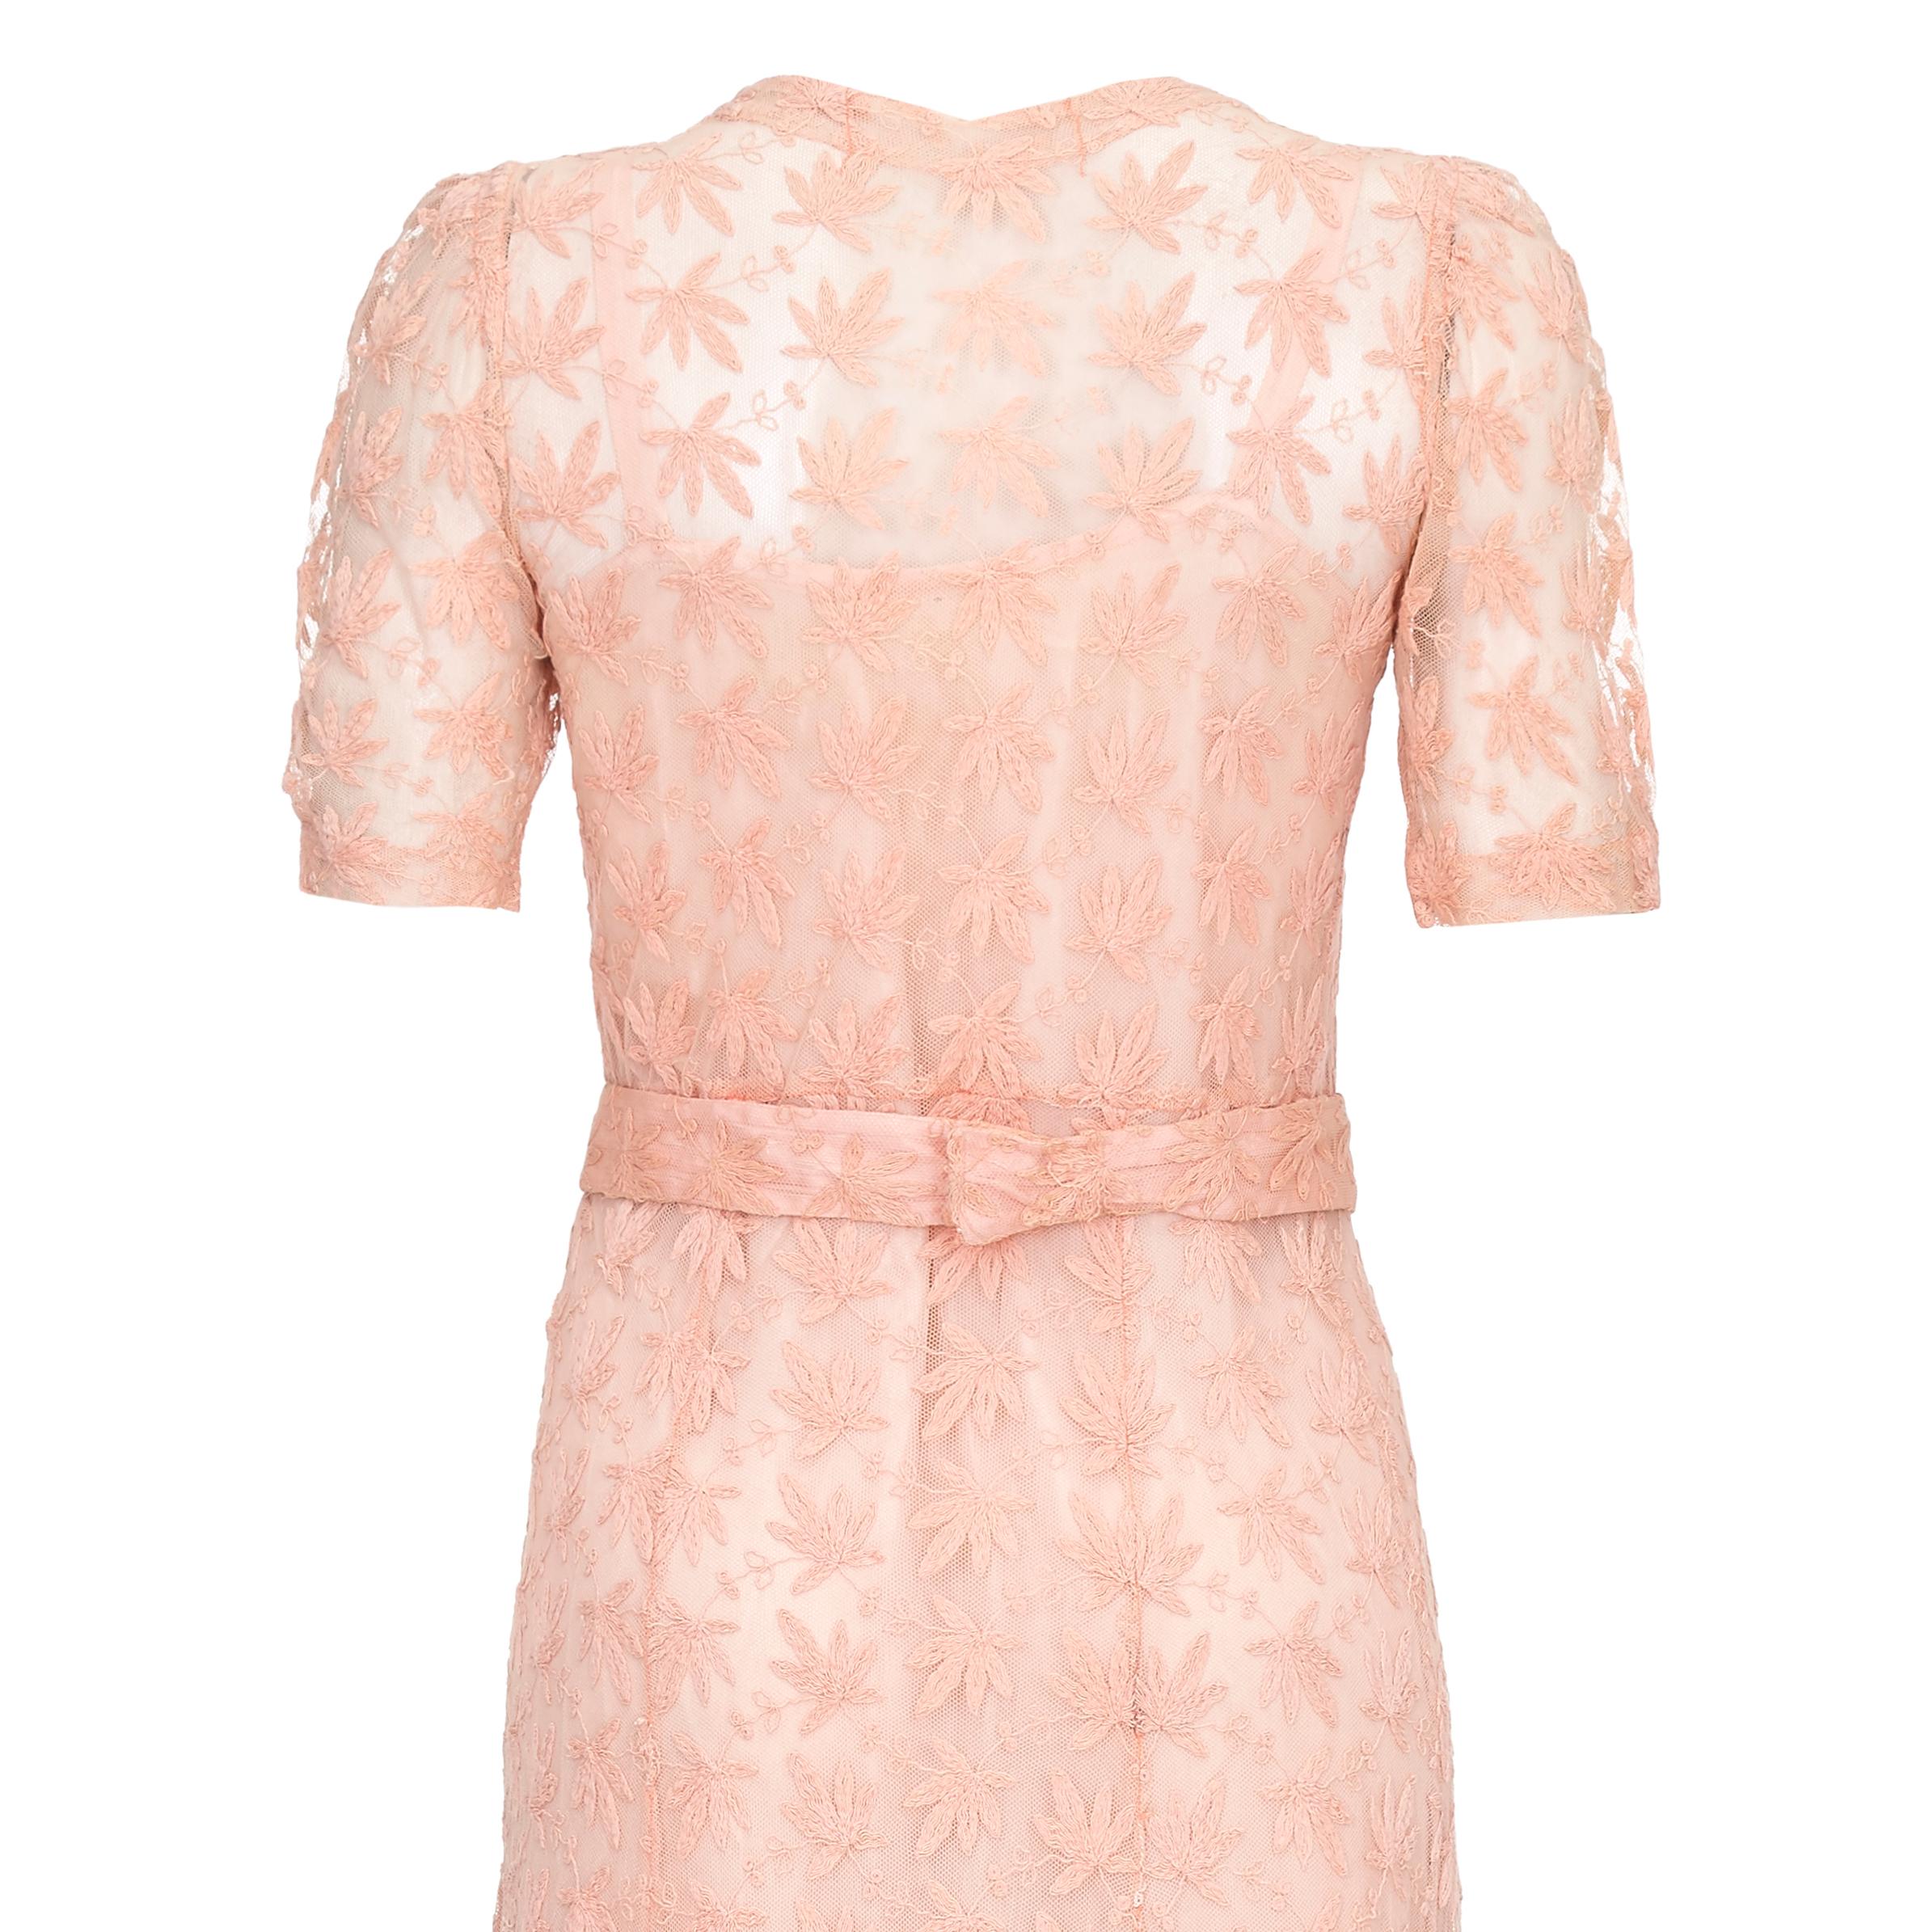 Women's 1930s Pale Pink Embroidered Lace Tea Gown Dress For Sale